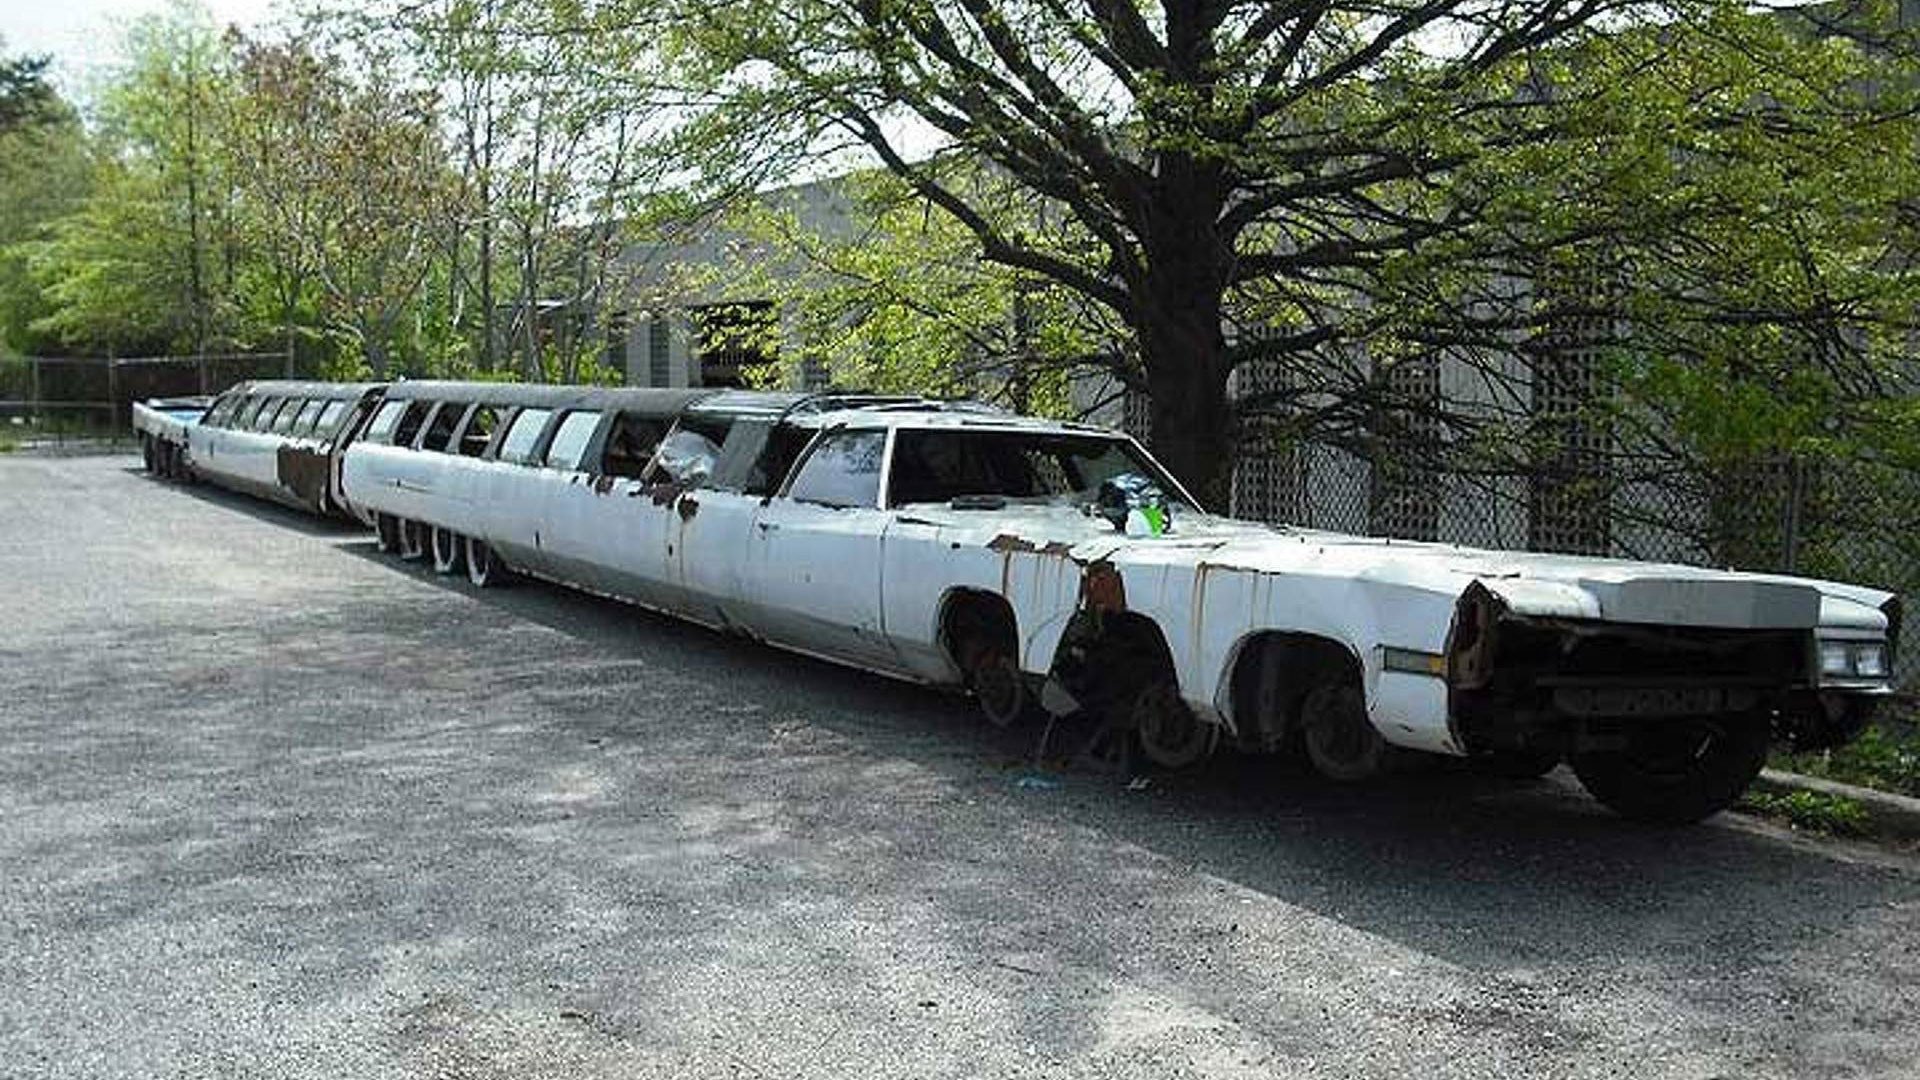 The longest car in the world is dead, but it